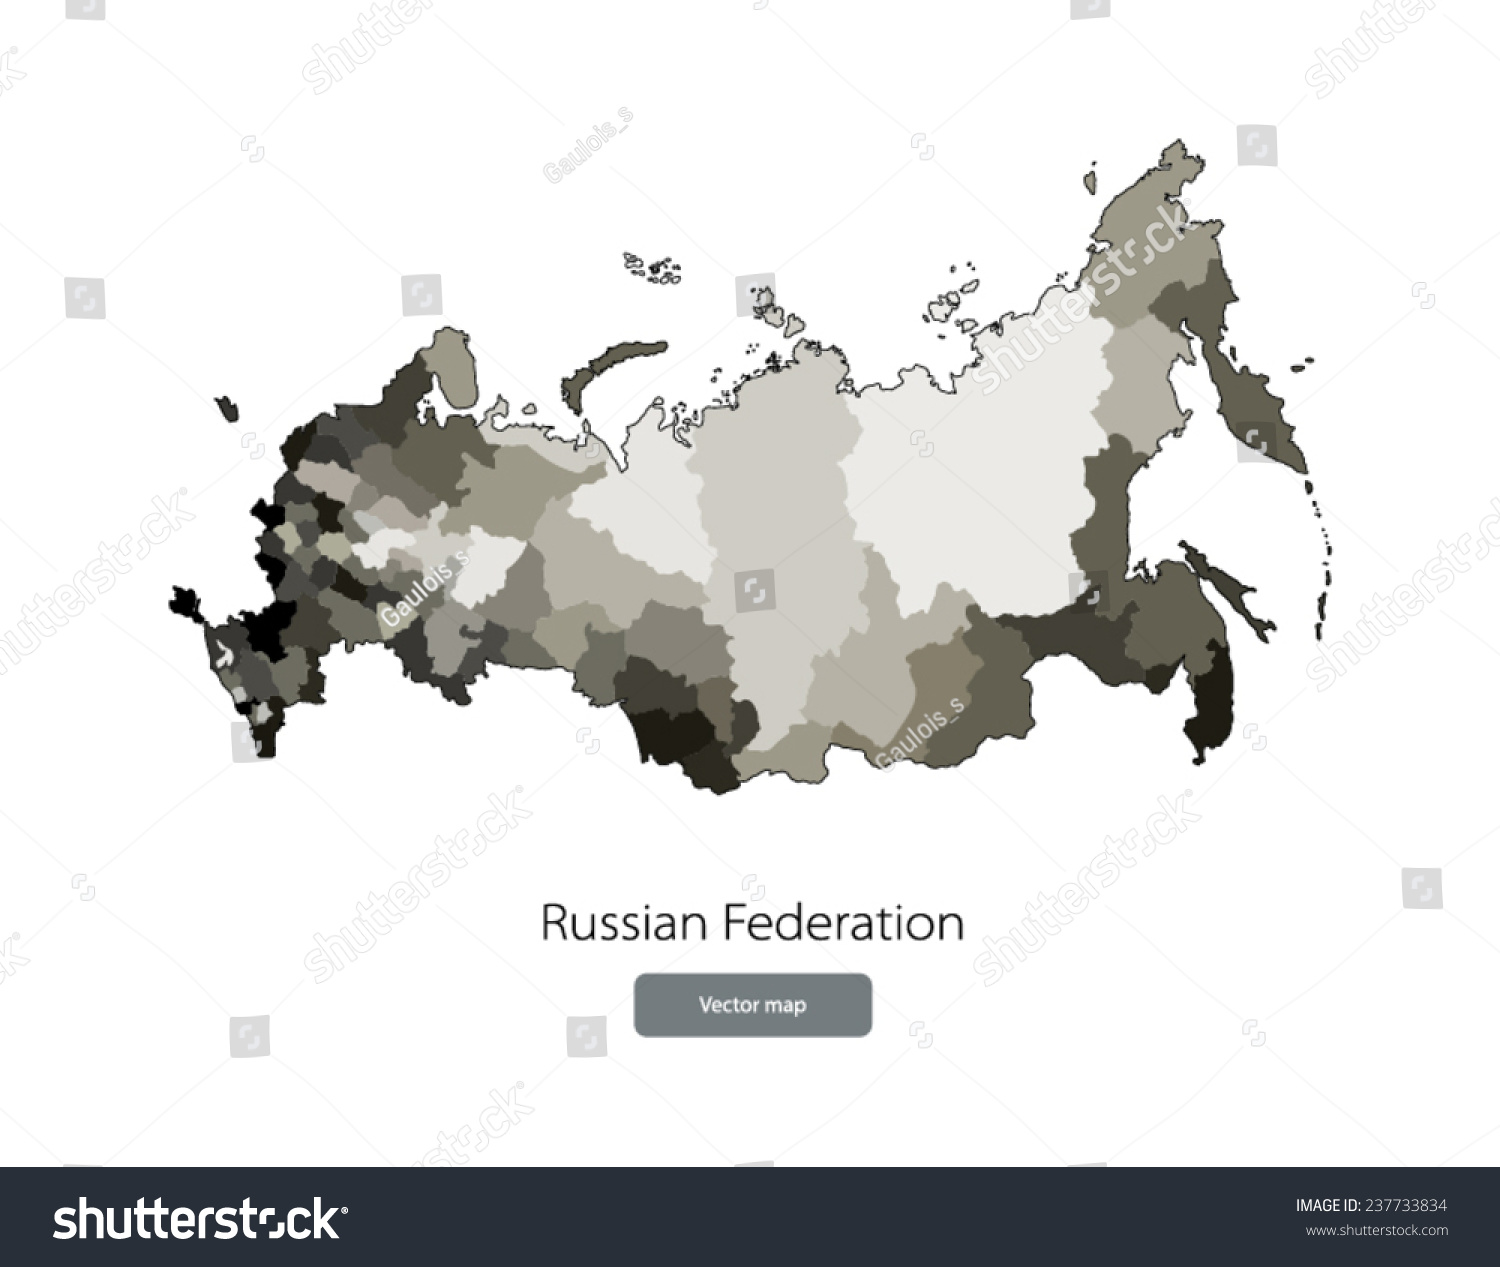 Subjects Of Russian Federation With 37